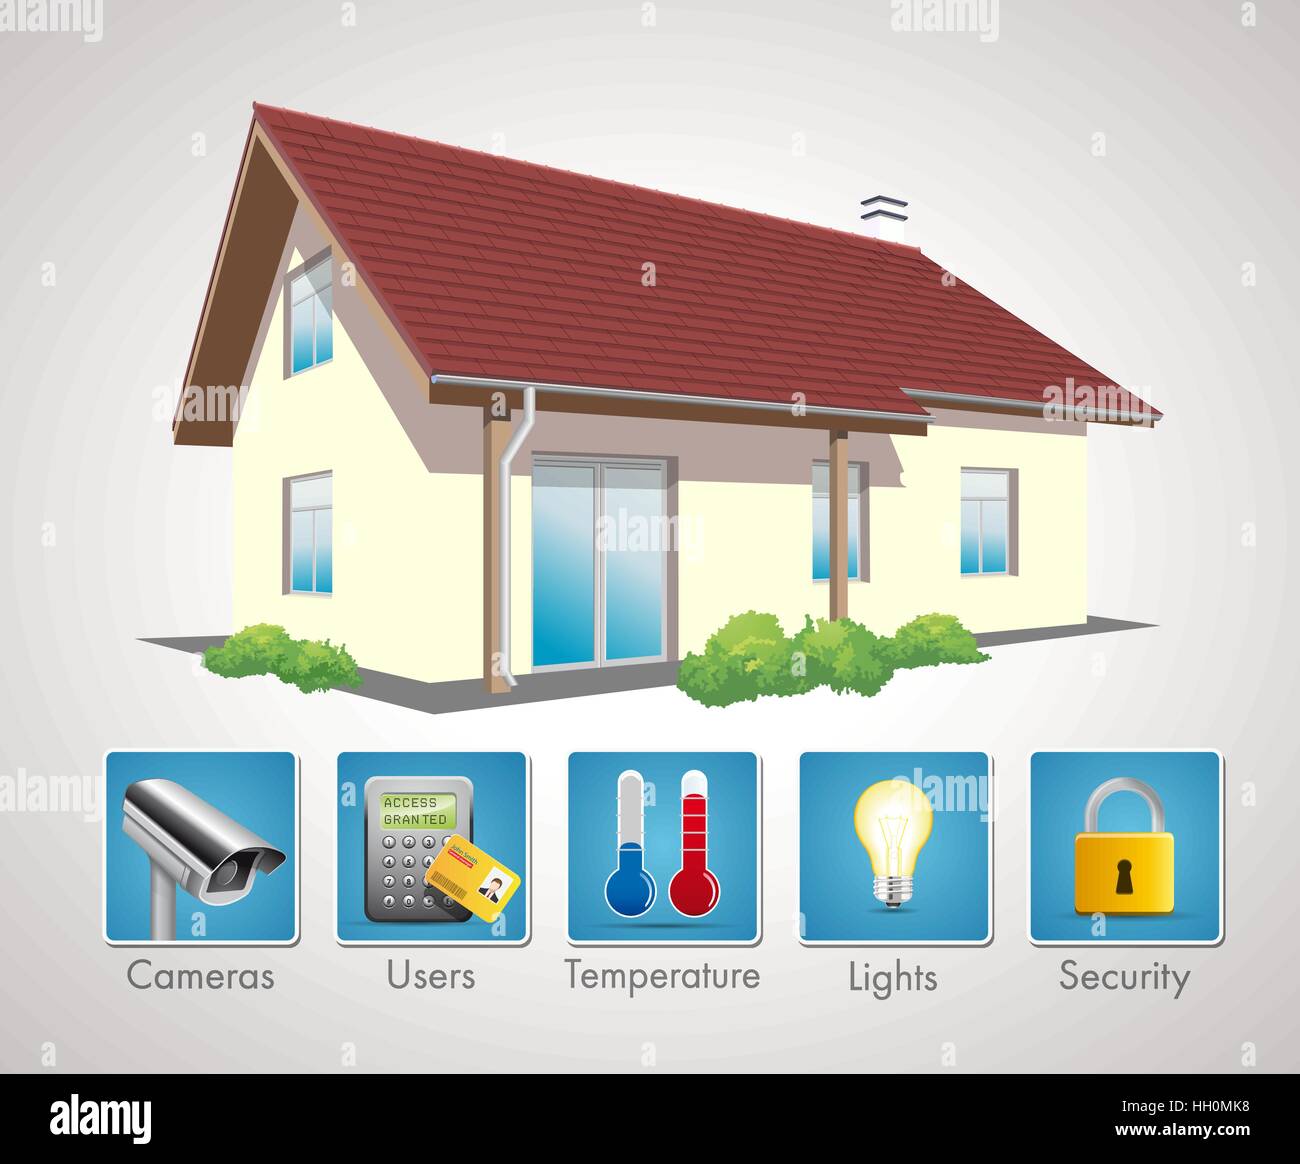 Home automation system - inteligent house management Stock Vector